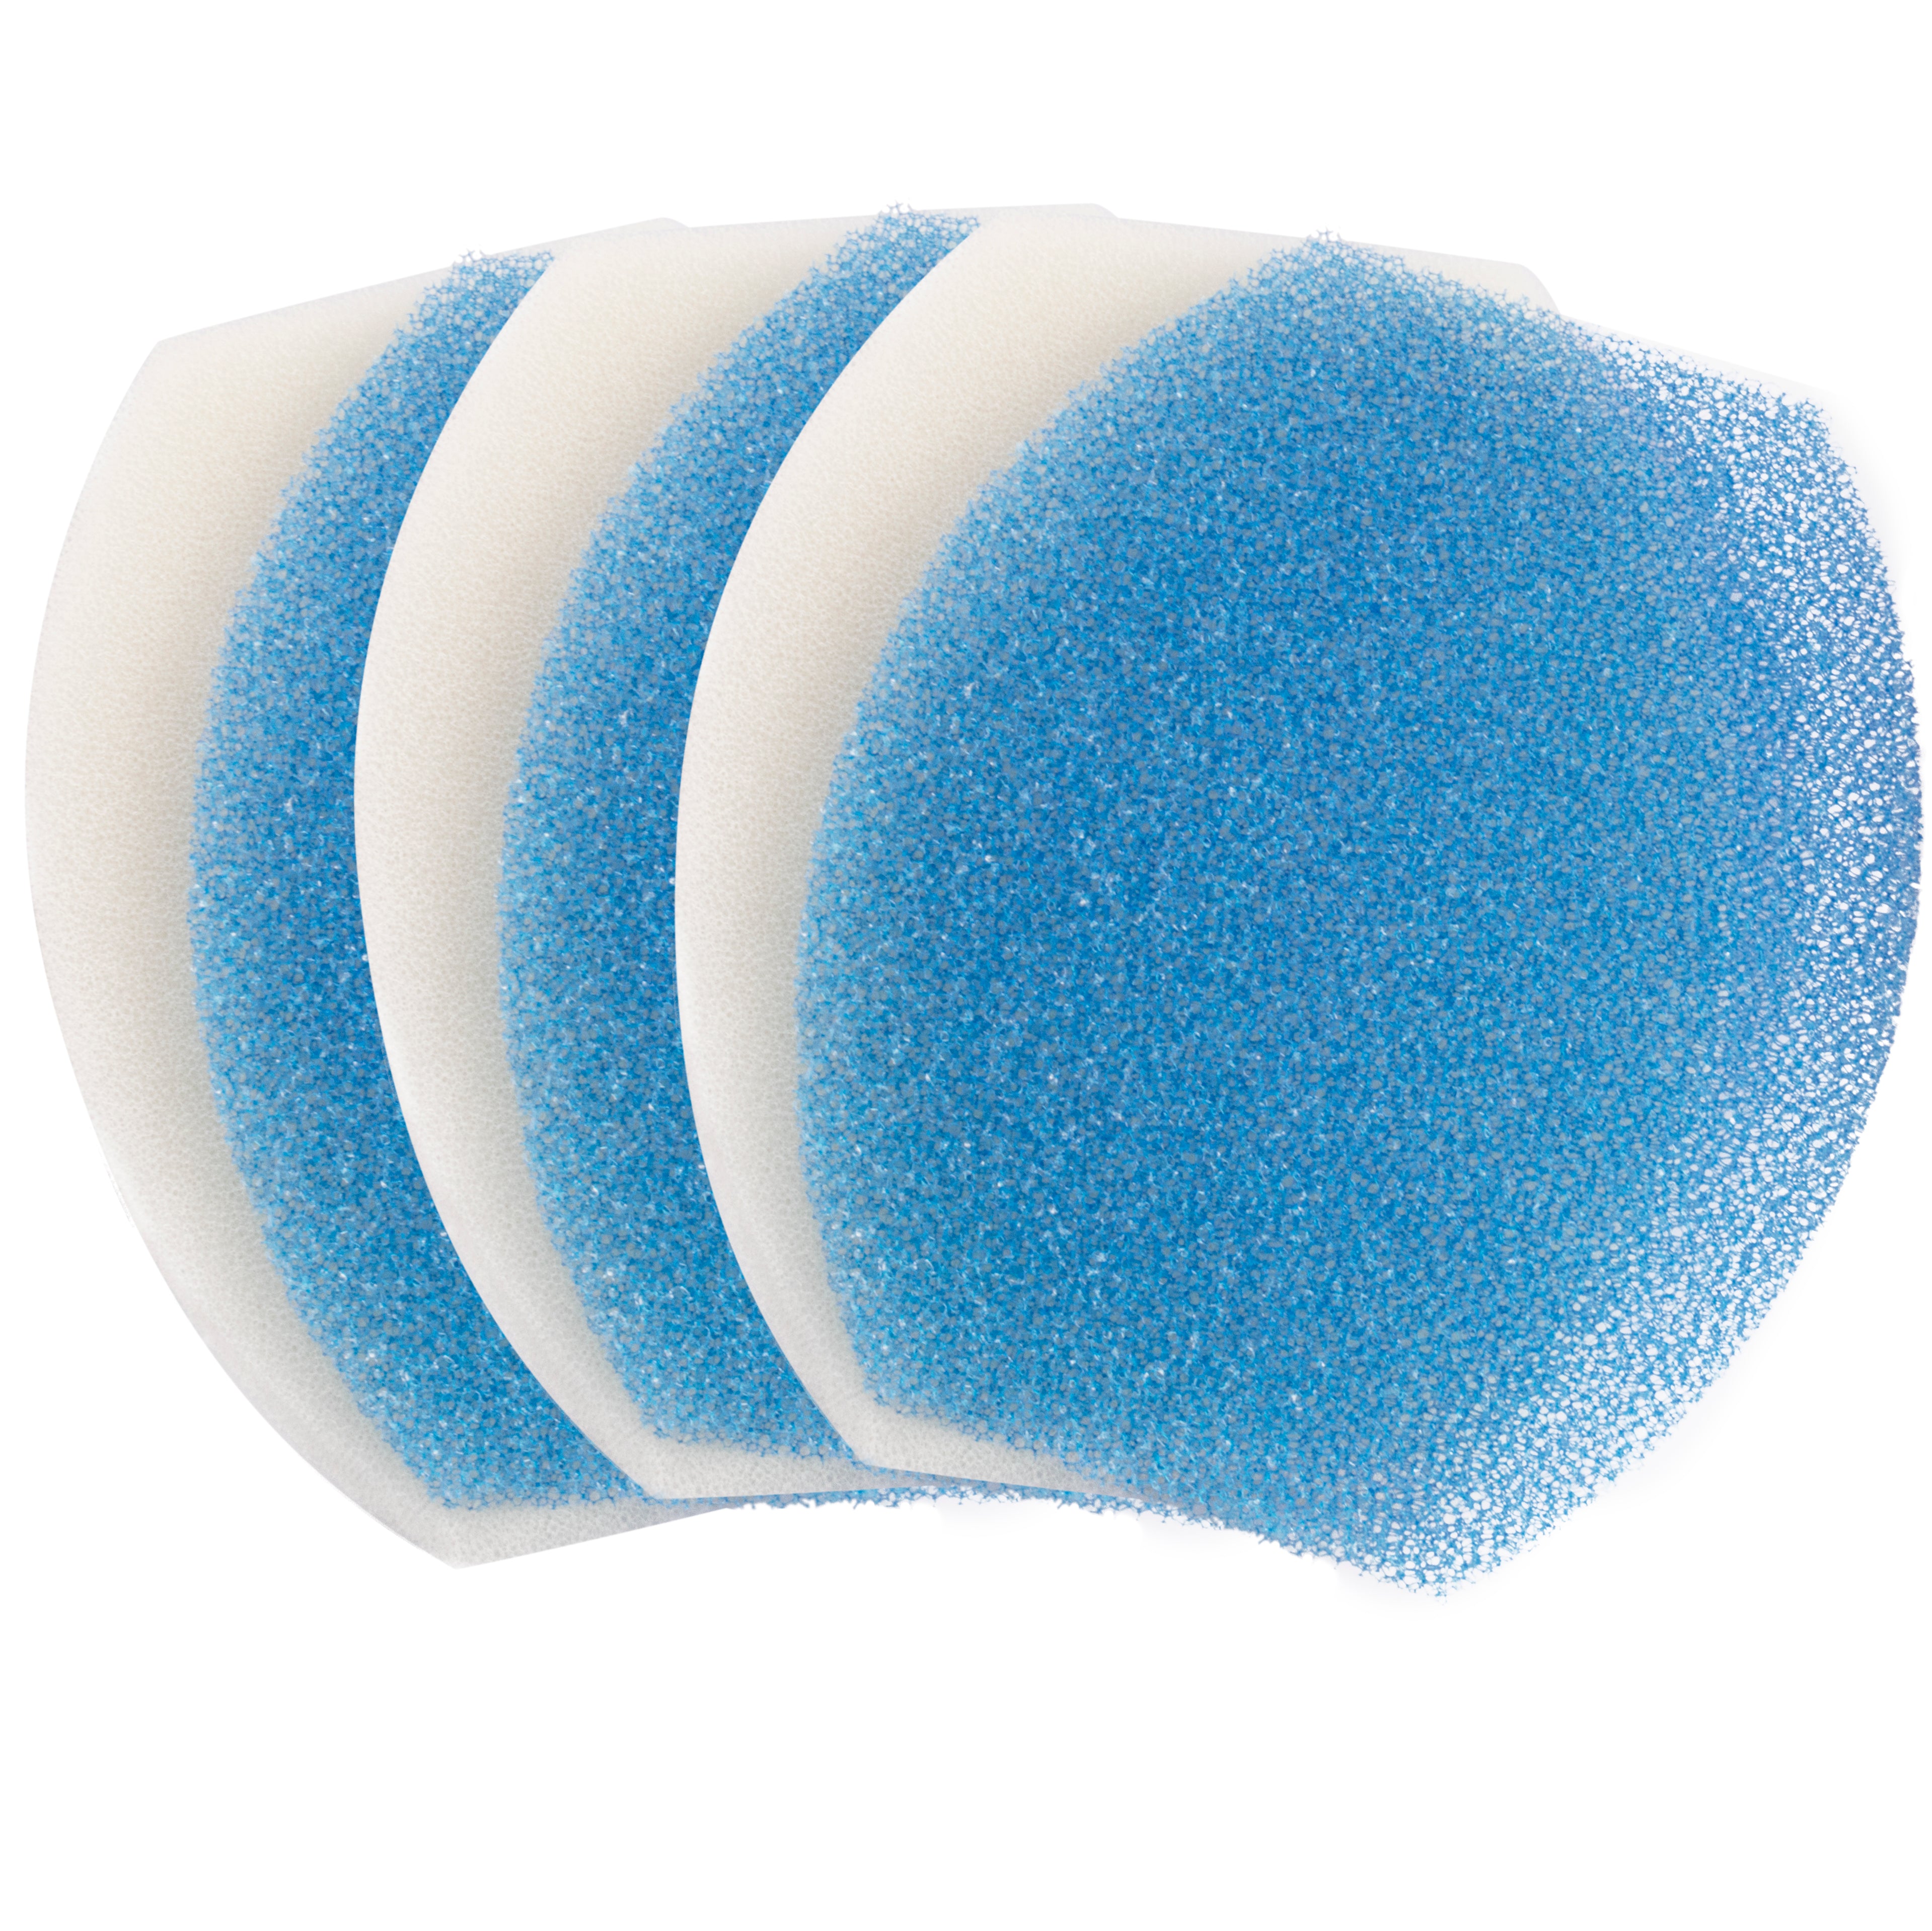 LTWHOME Coarse and Medium Foam Pads Set Fits for Blagdon Affinity Inpond (Pack of 3 Sets)